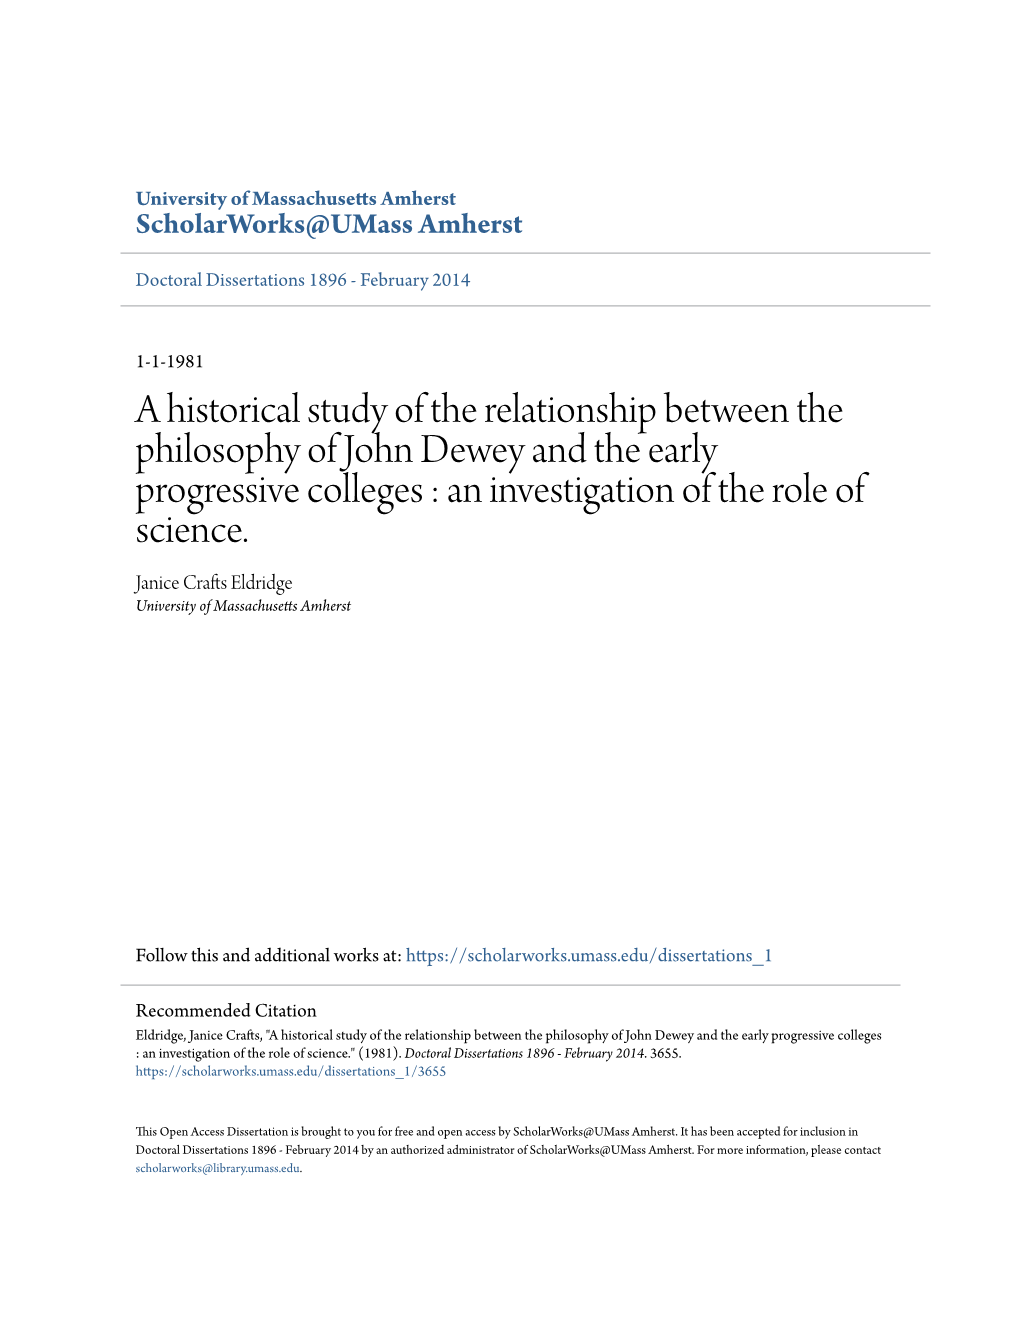 A Historical Study of the Relationship Between the Philosophy of John Dewey and the Early Progressive Colleges : an Investigation of the Role of Science